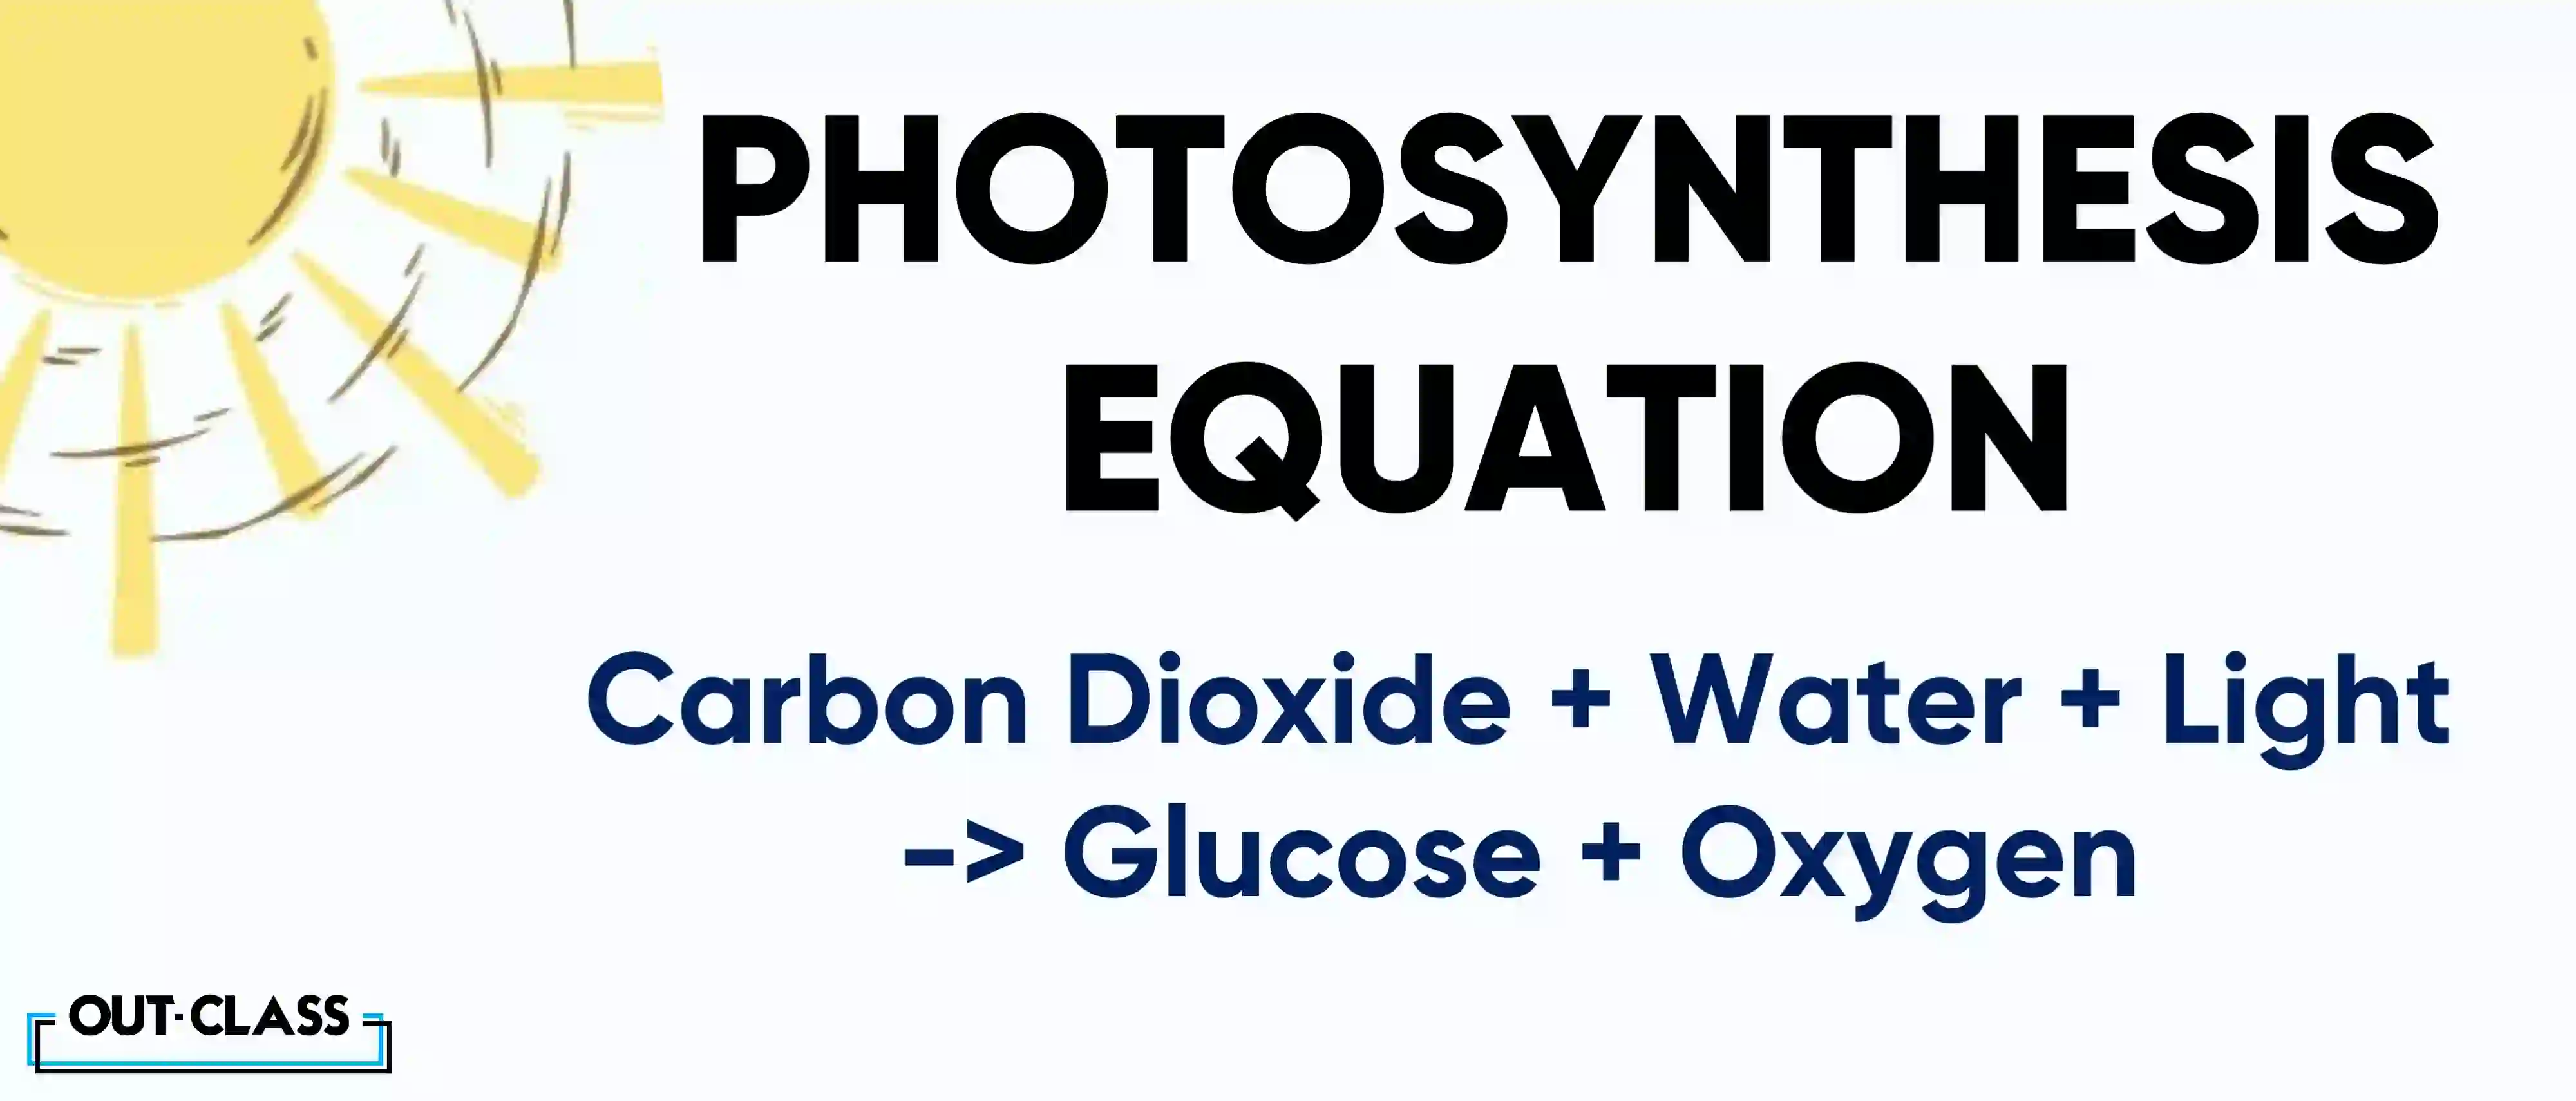 This formula encapsulates the magical conversion of sunlight, water, and carbon dioxide into glucose and oxygen – a fundamental concept for O Level and IGCSE Biology students. 